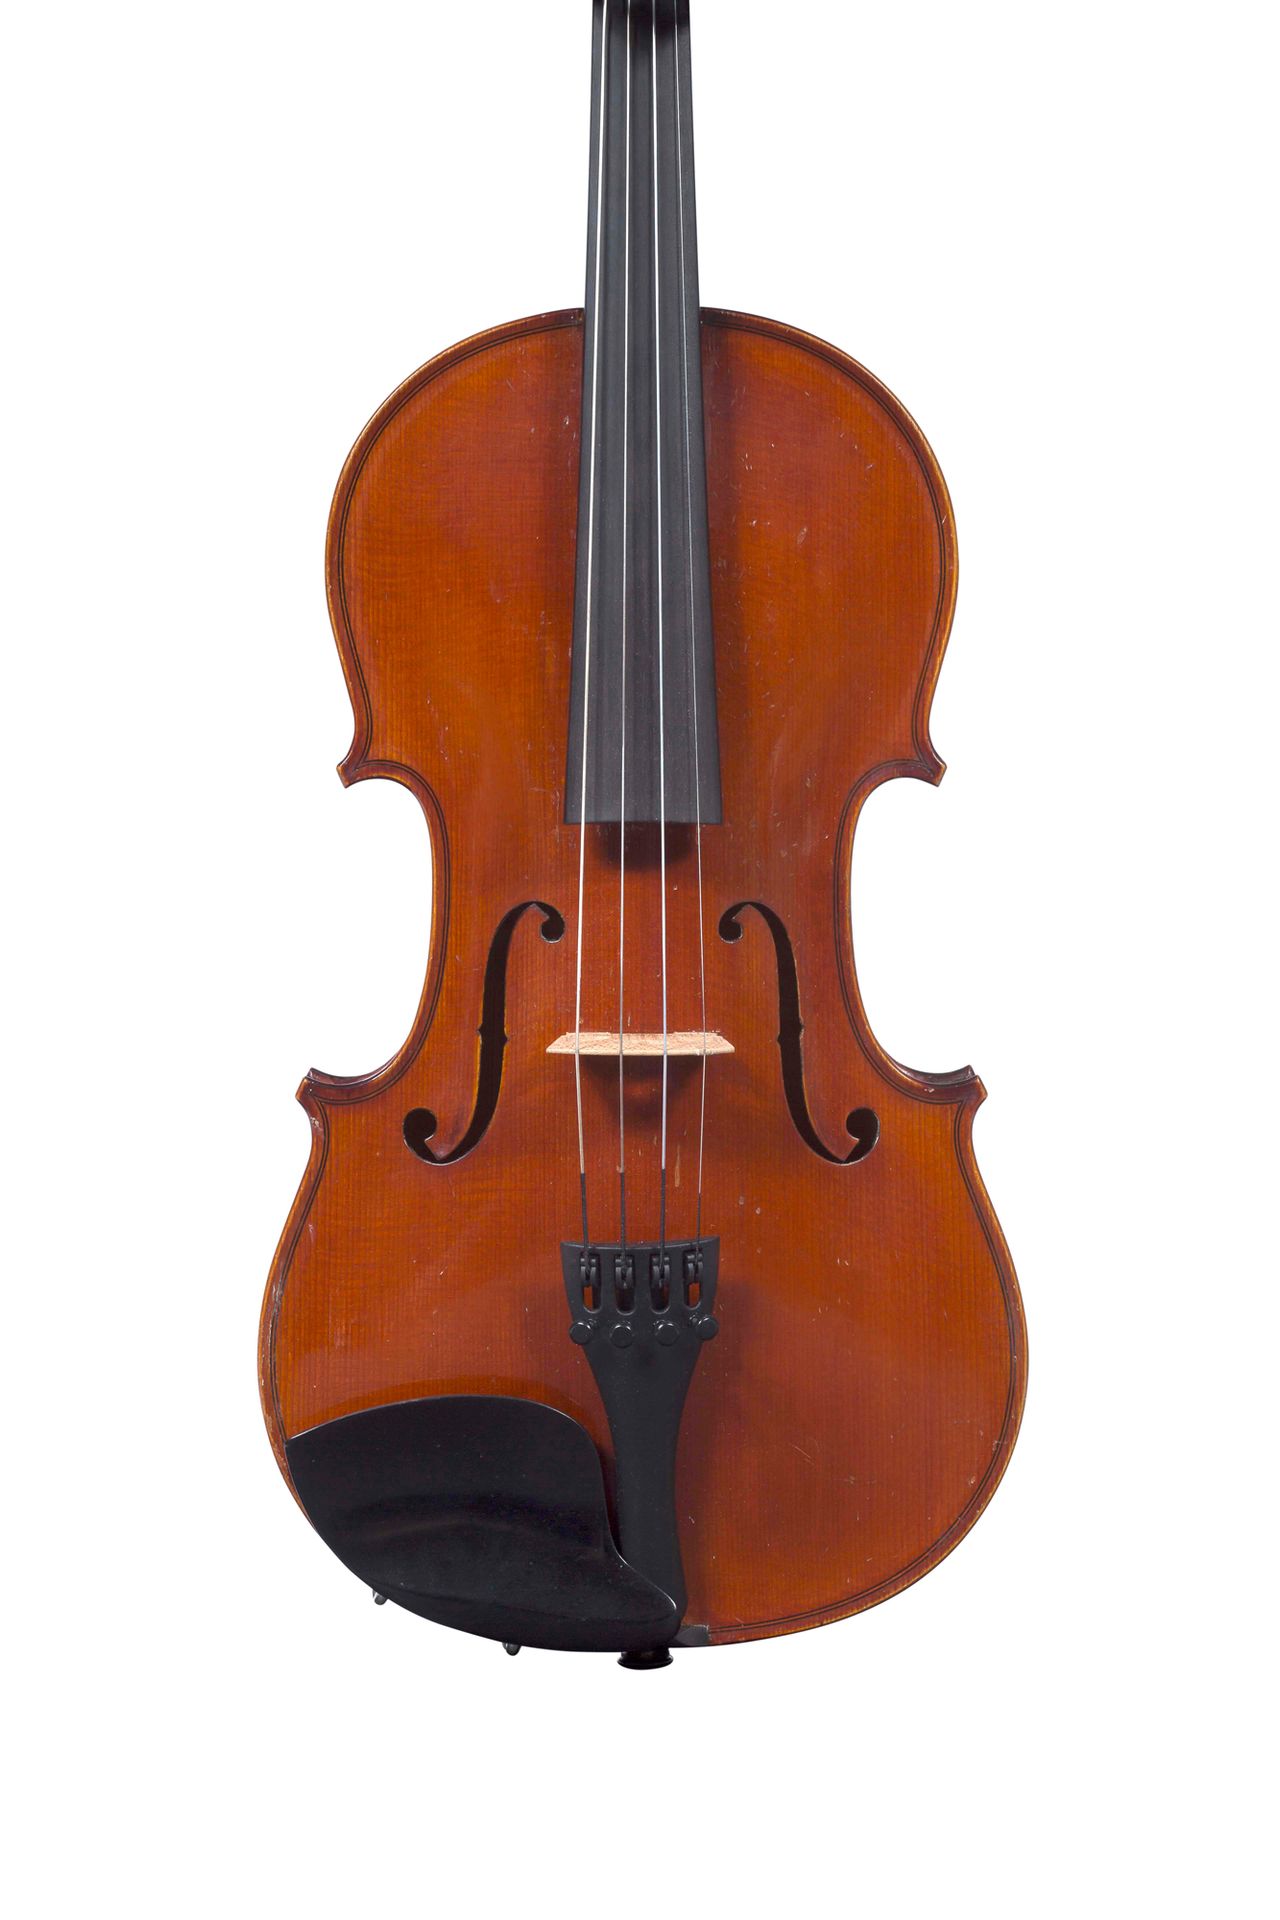 Null A French Violin by Auguste Delivet, Paris 1905